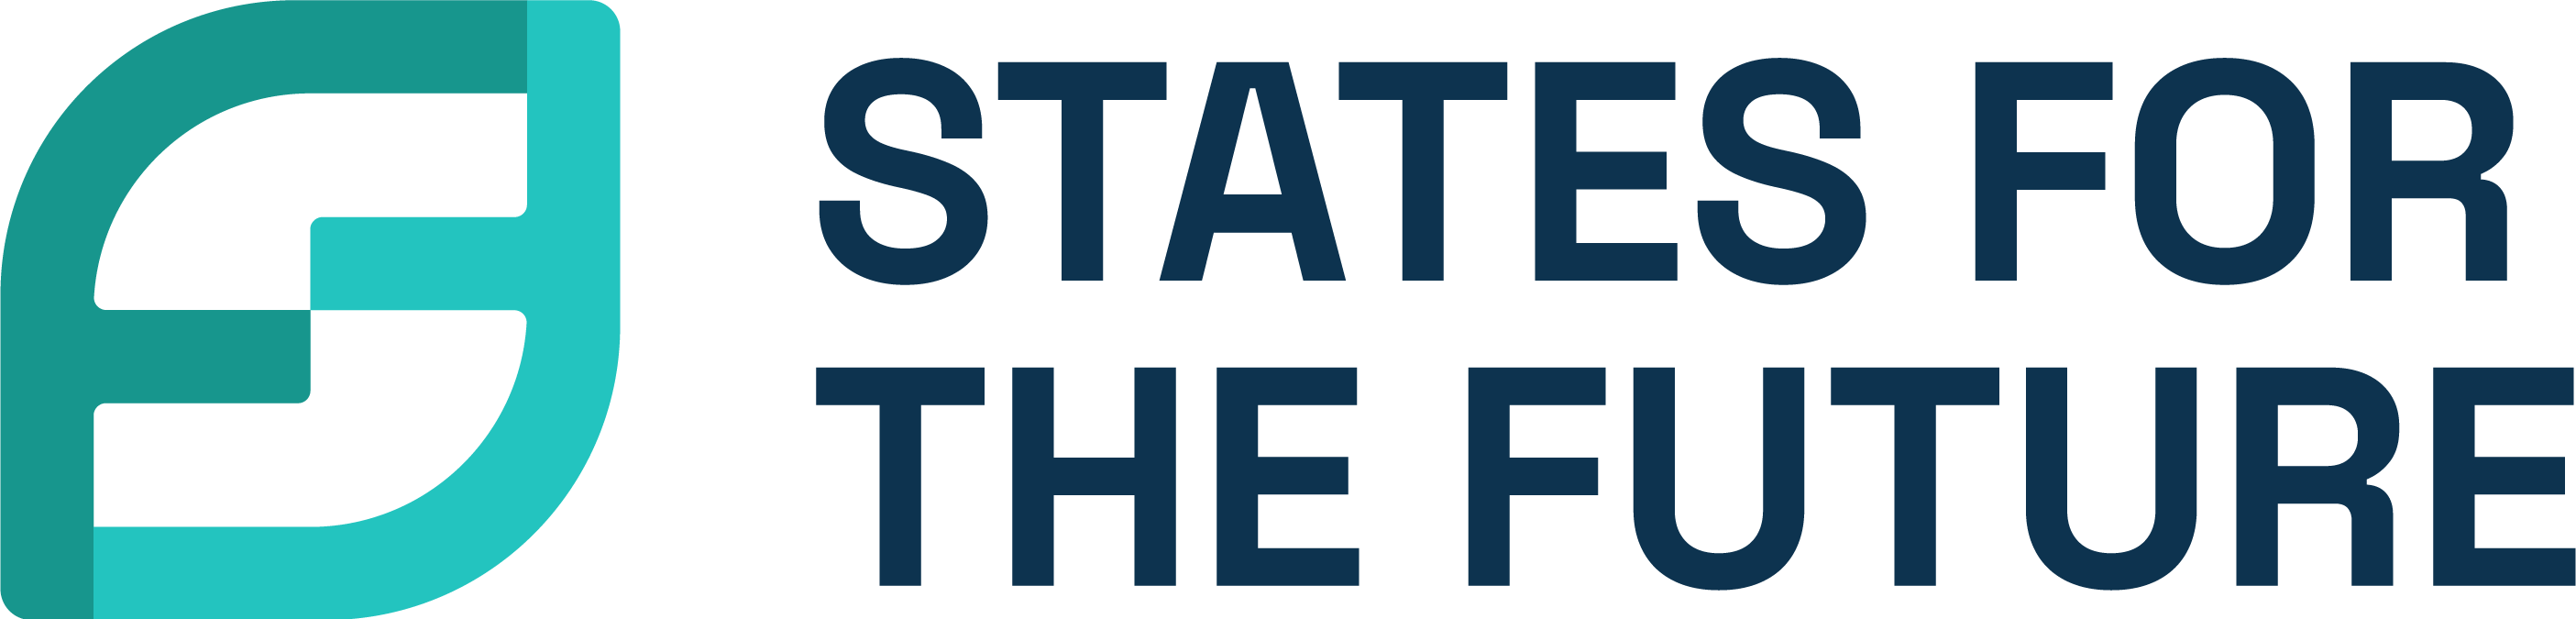 States for the future: a data driven policy network